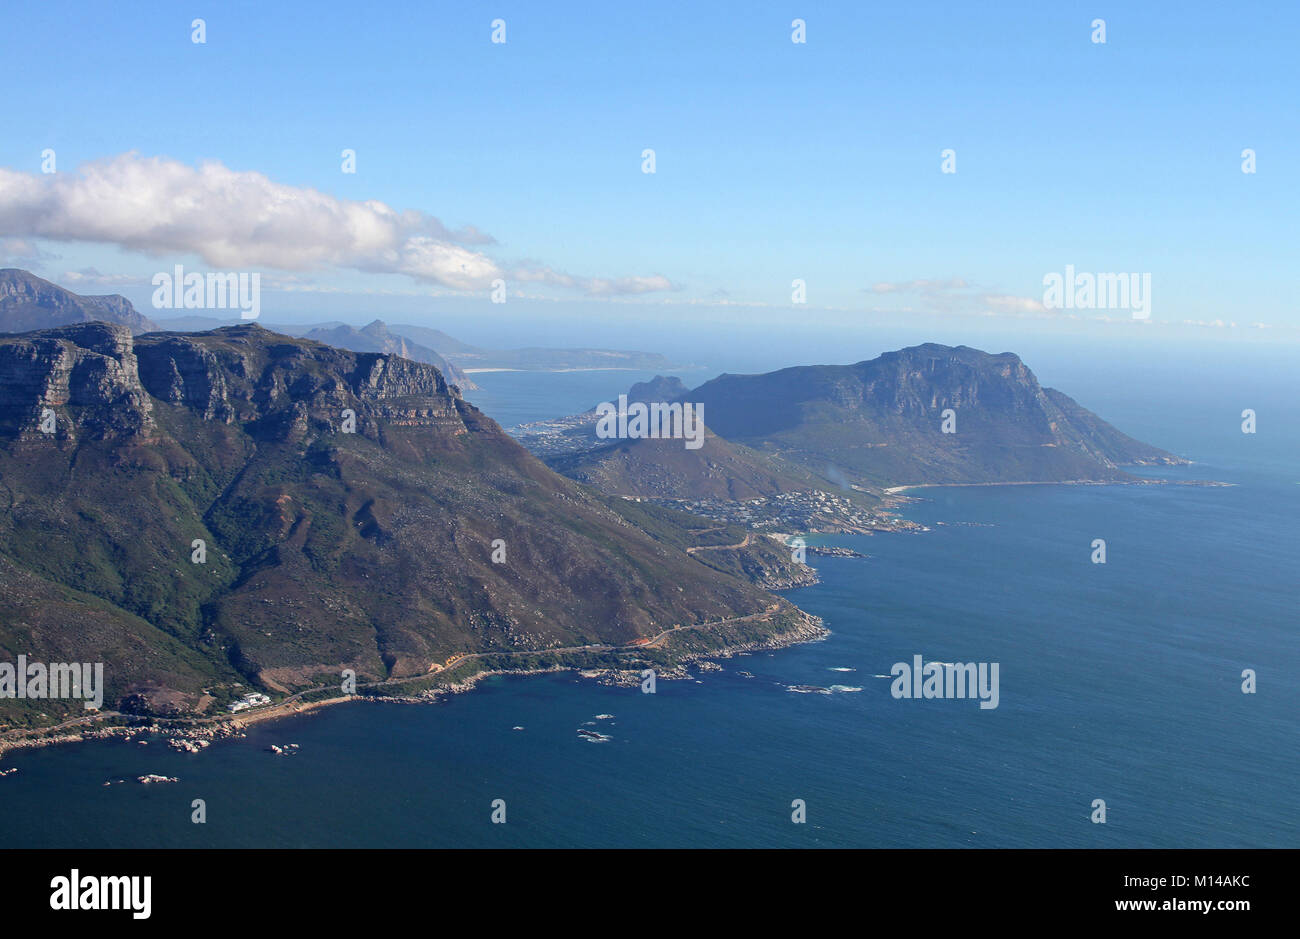 Helicopter view of Oudekraal part of Table Mountain, Hout Bay, Mount Rhodes, Mount Karbonkelberg and various beaches along Vicotoria Road, Cape Town,  Stock Photo